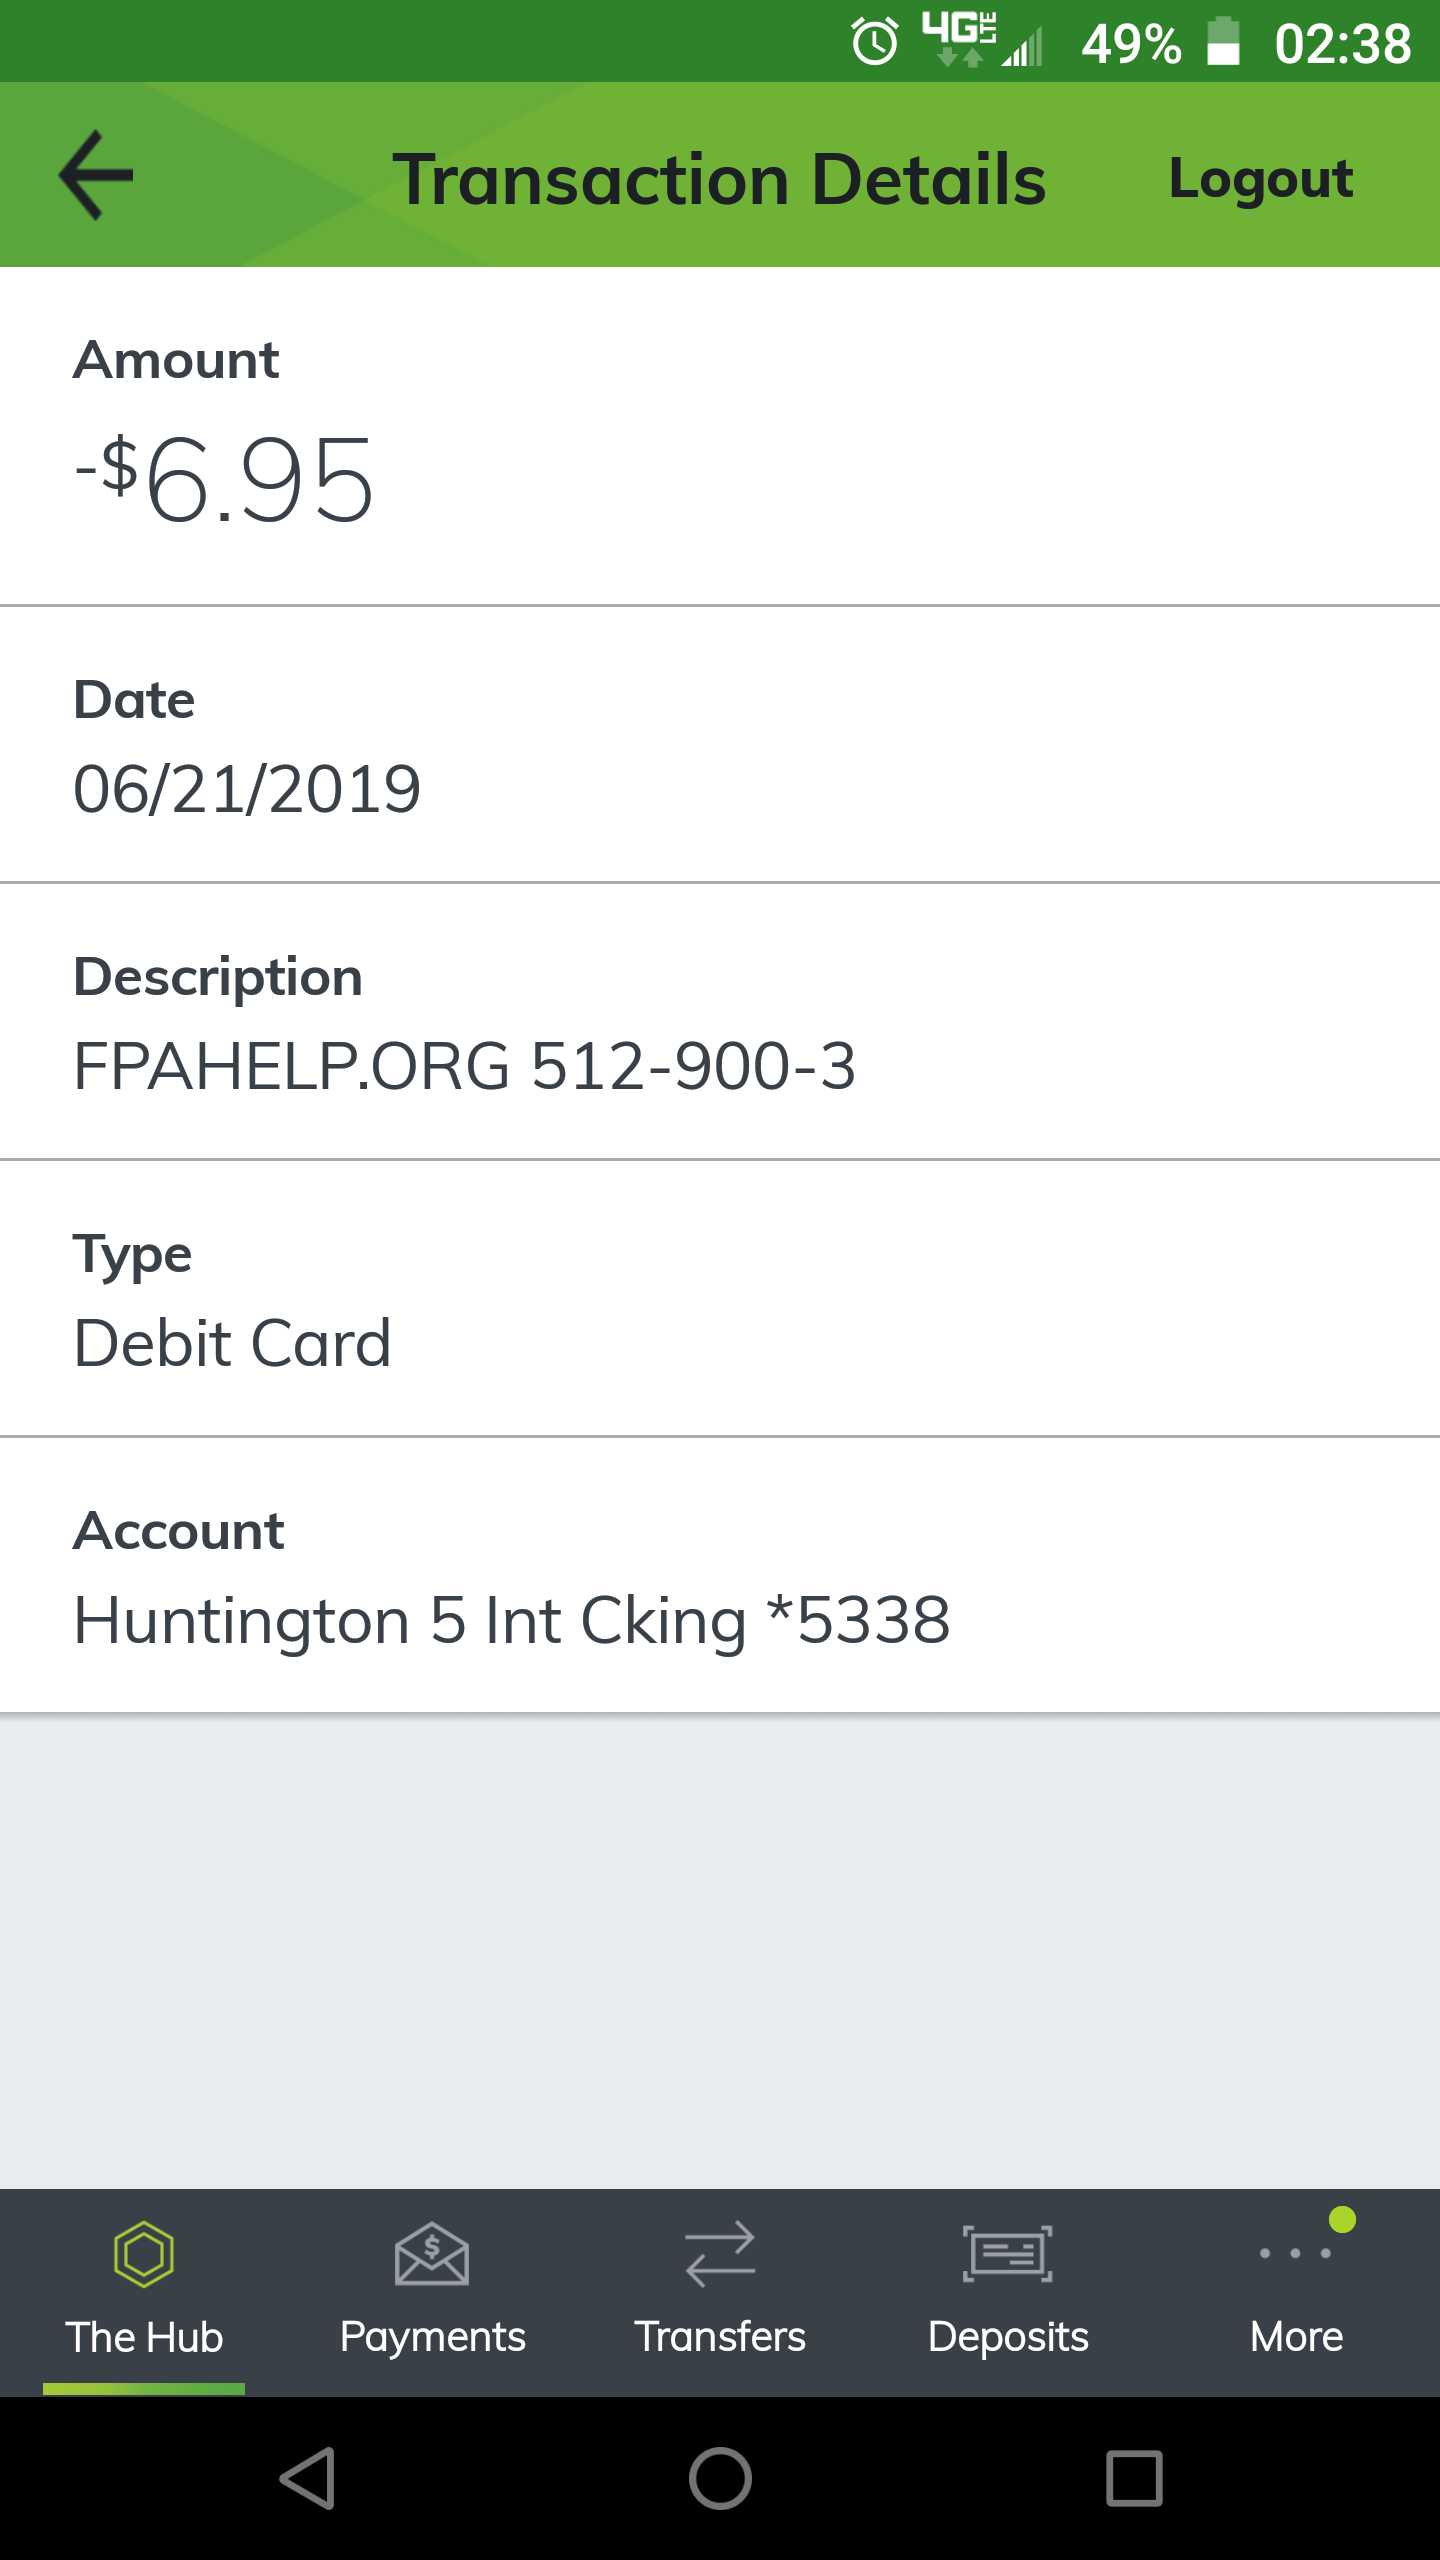 Charges twice like this on my account